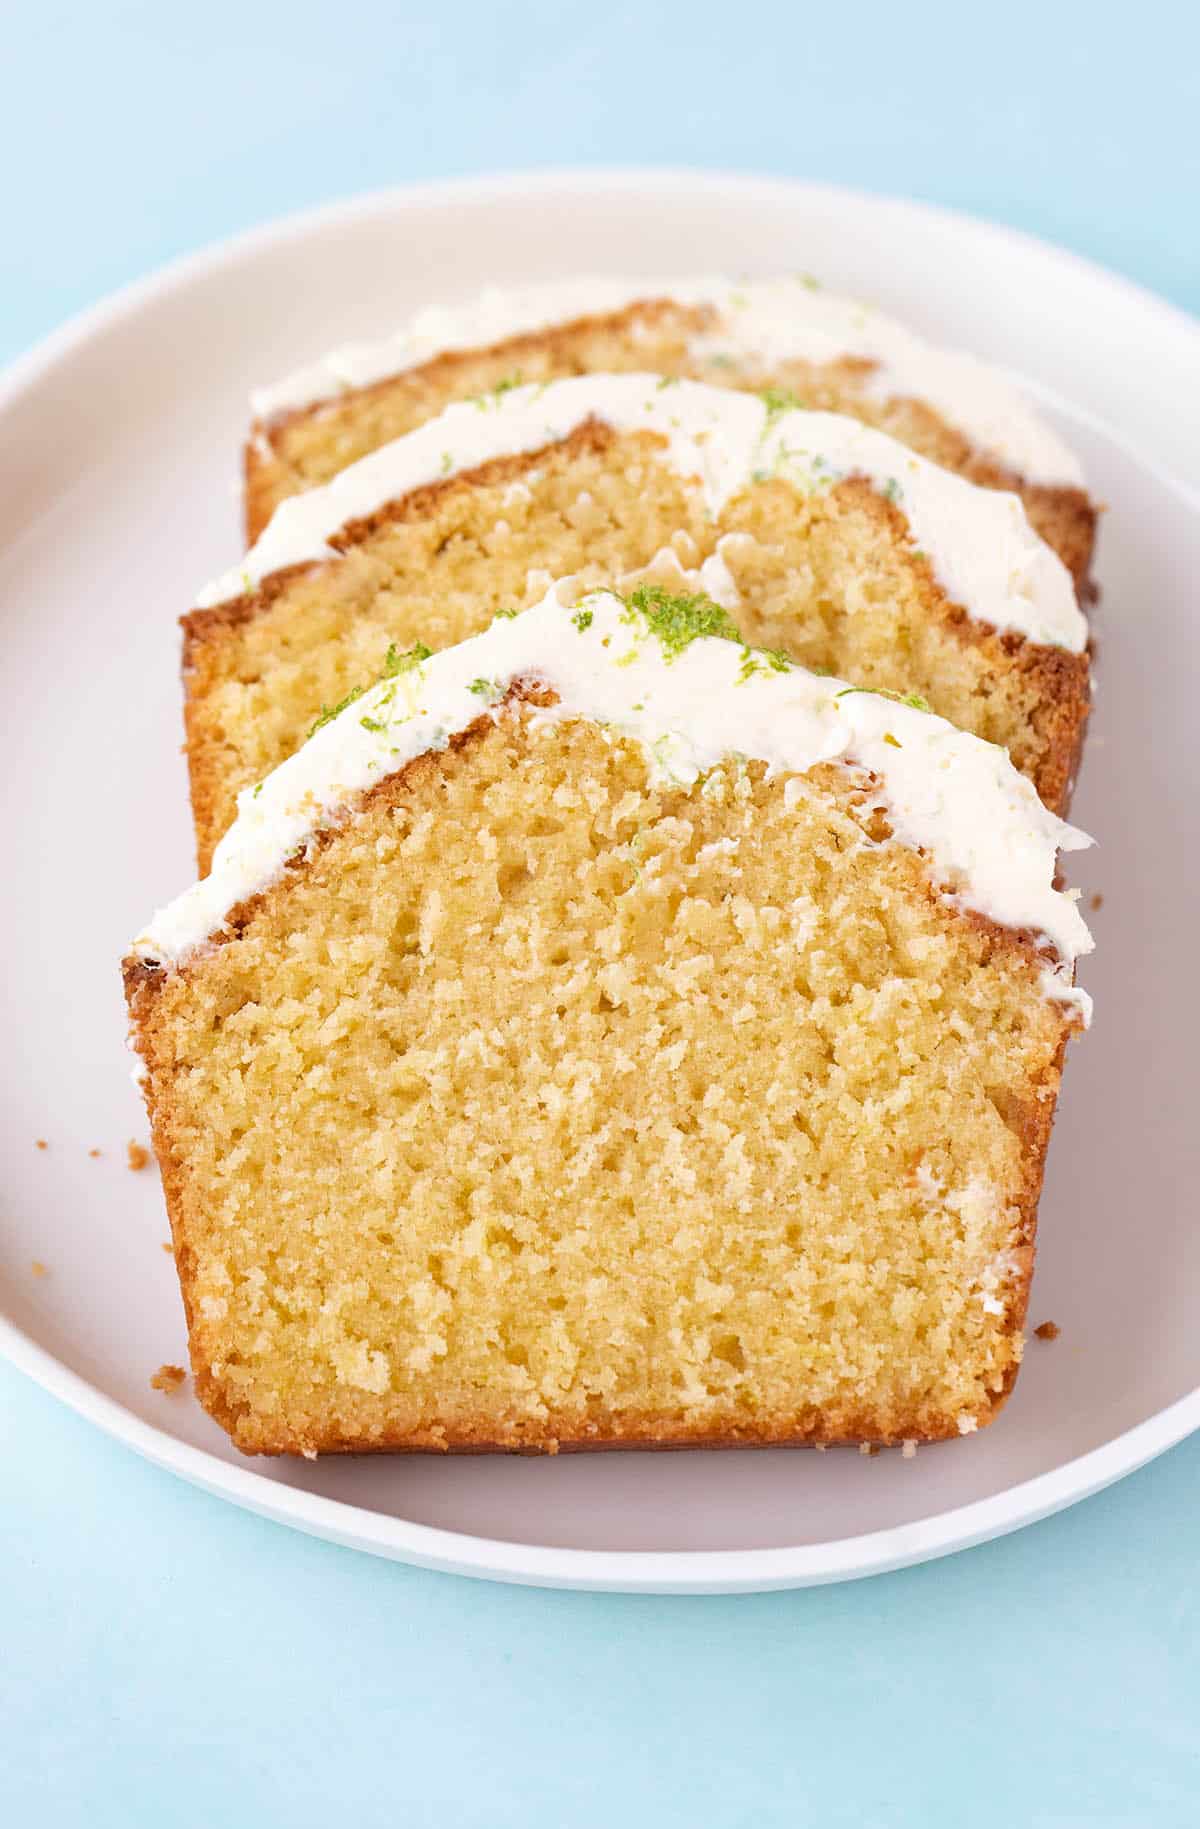 Slices of coconut cake with cream cheese frosting on a white plate